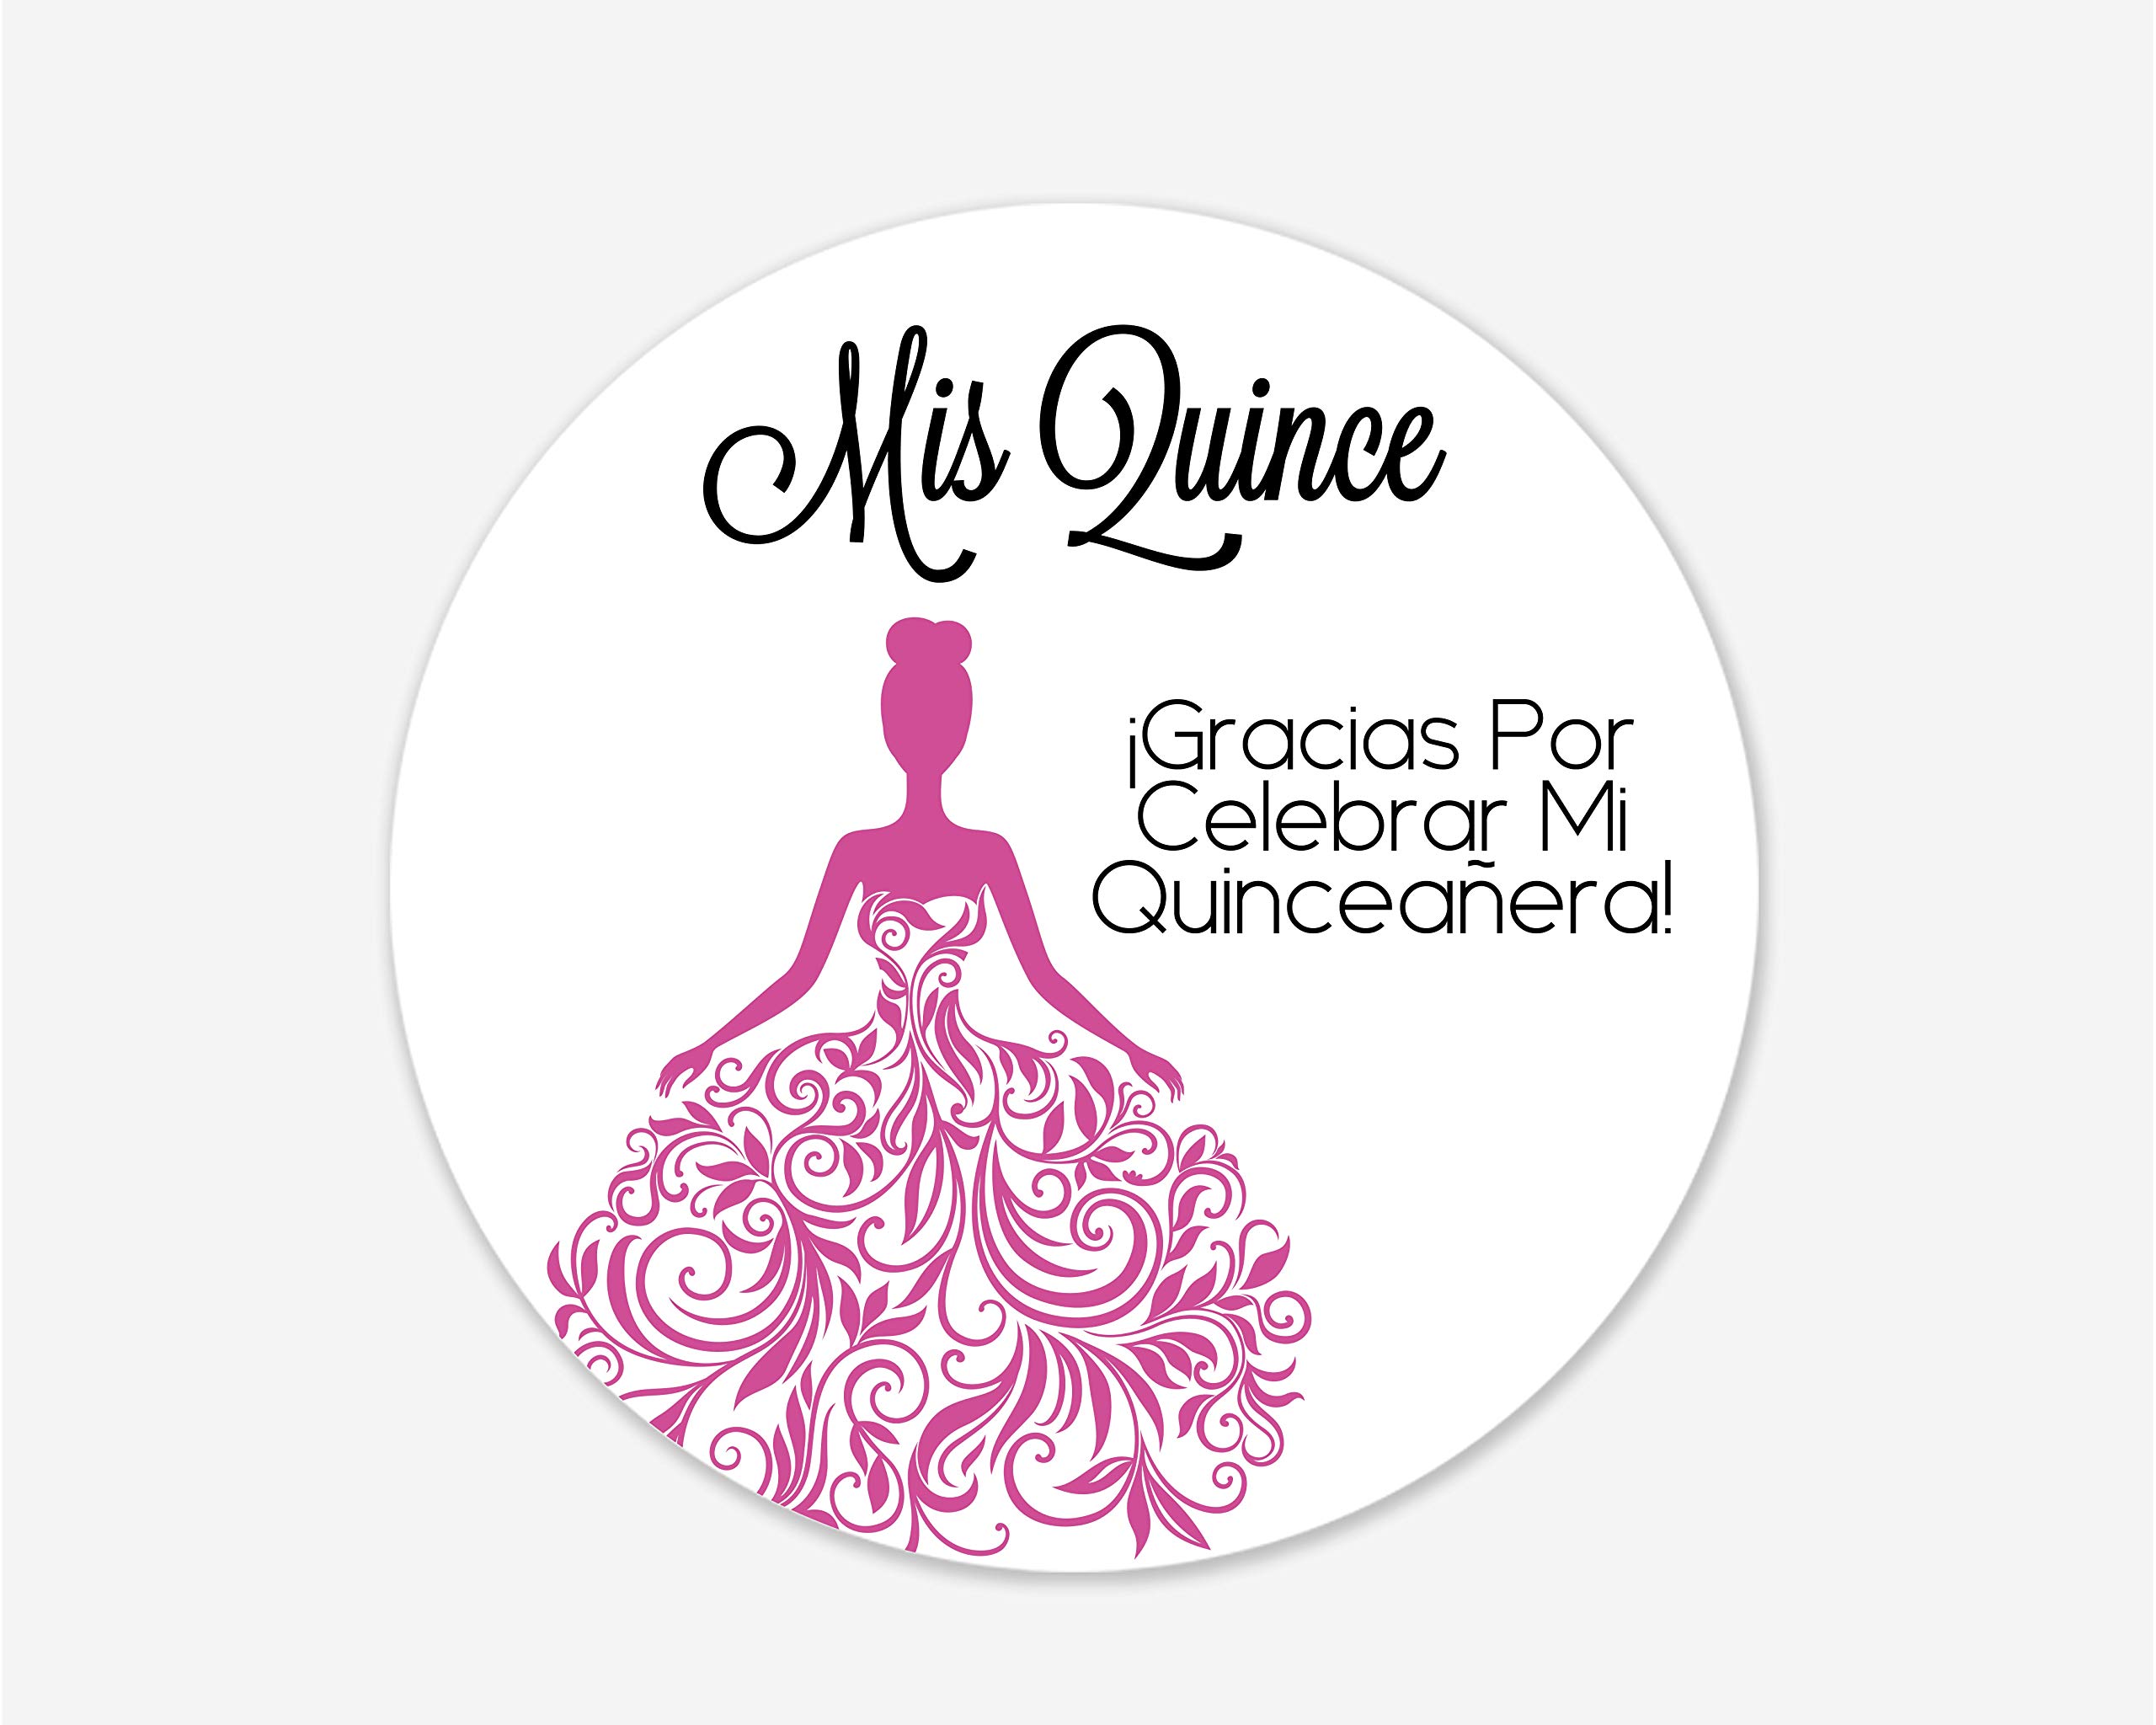 Orange Umbrella Co 40Ct Quinceanera Stickers, Mis Quince, Spanish Or English Stickers For 15Th Birthday (027) (Spanish - Pink)